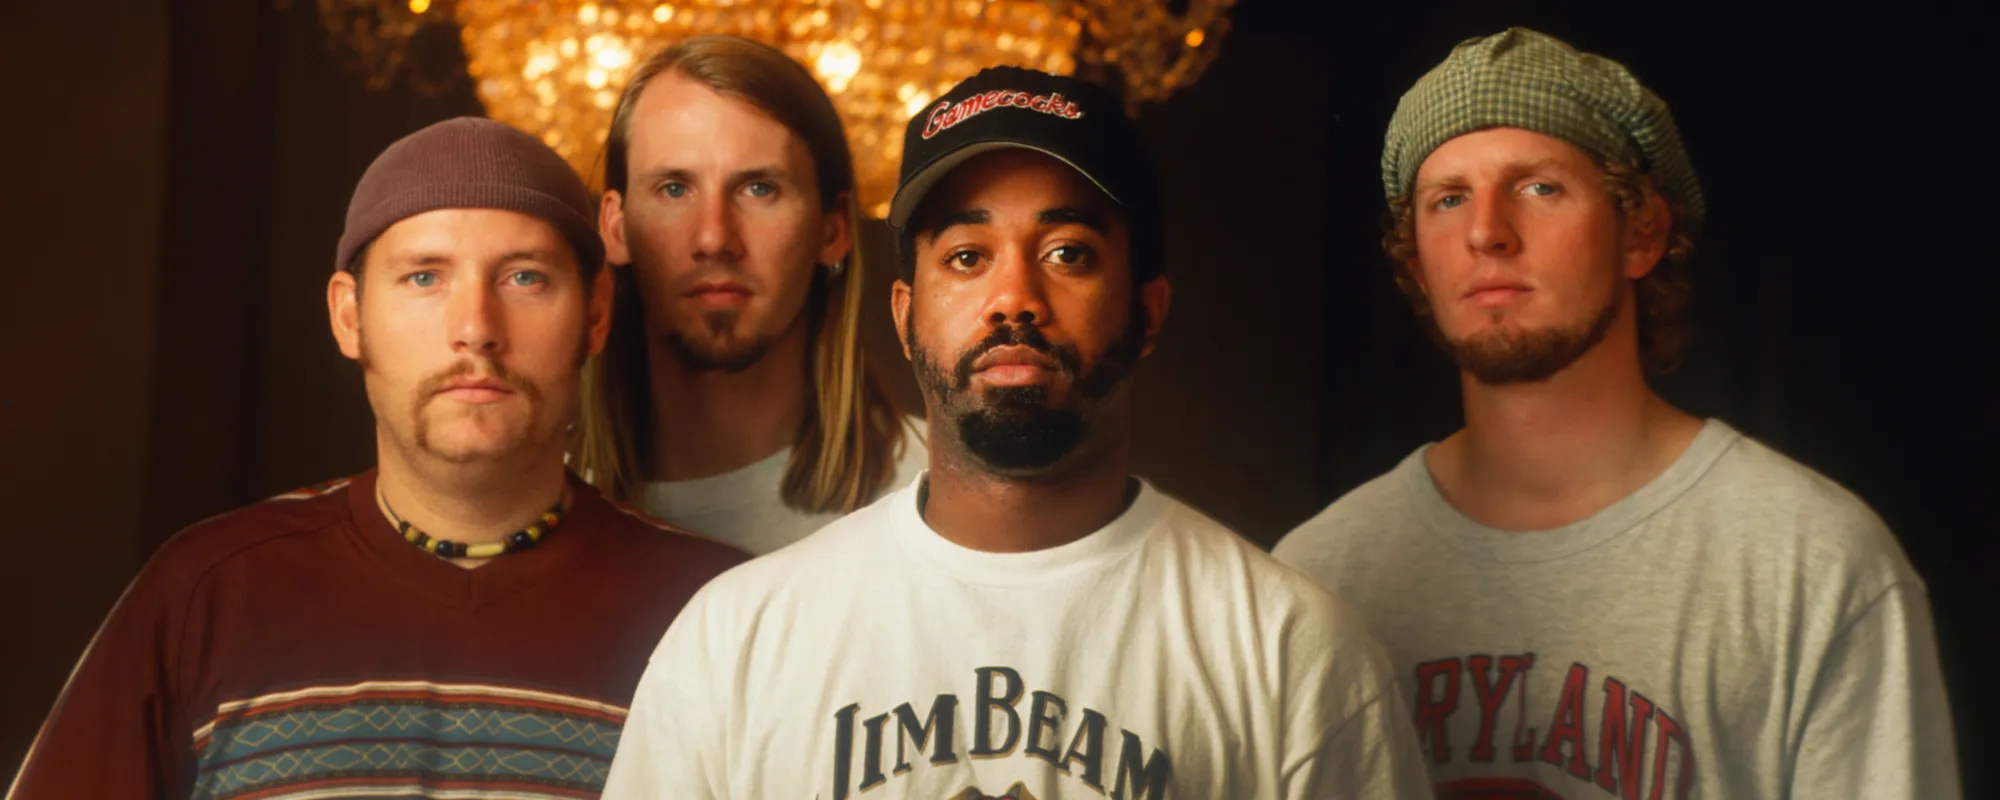 The Origins of Hootie & the Blowfish Date Back to a College Dorm Room